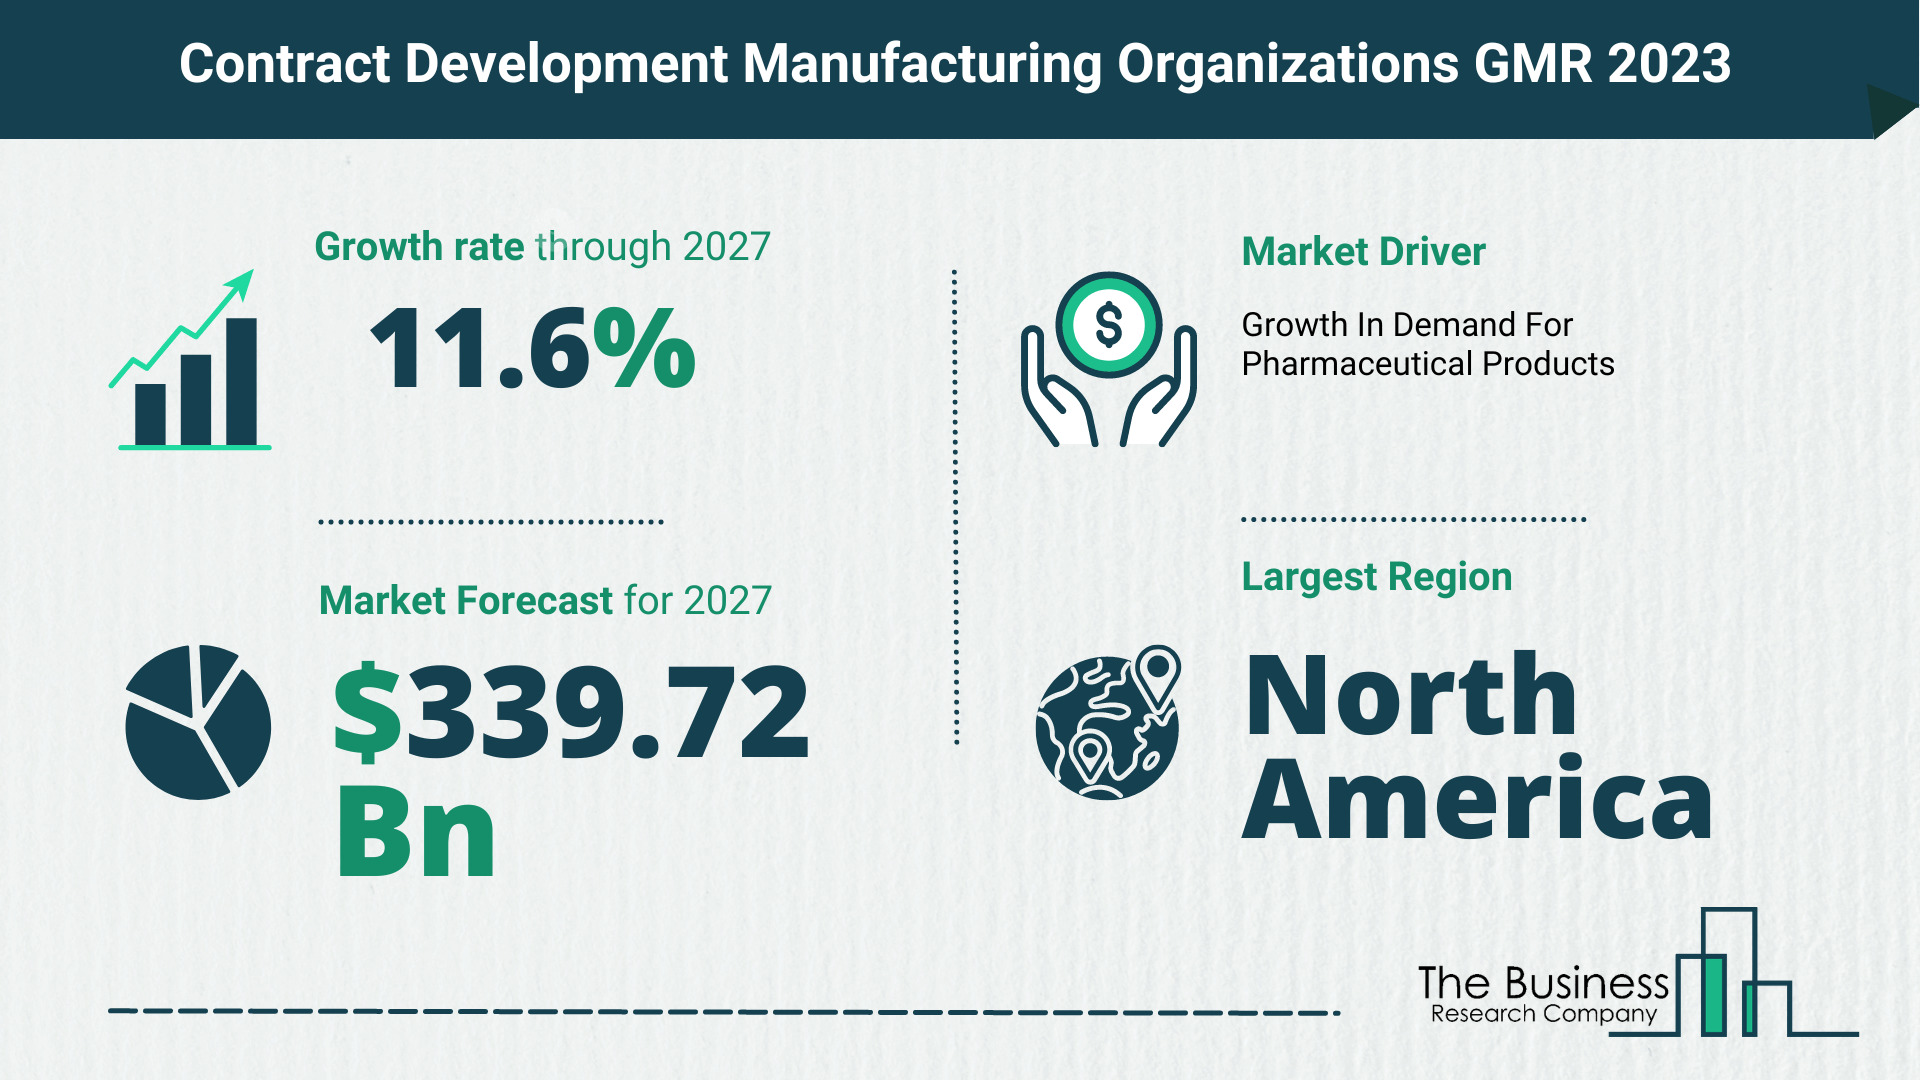 contract development manufacturing organizations market trends, contract development manufacturing organizations market